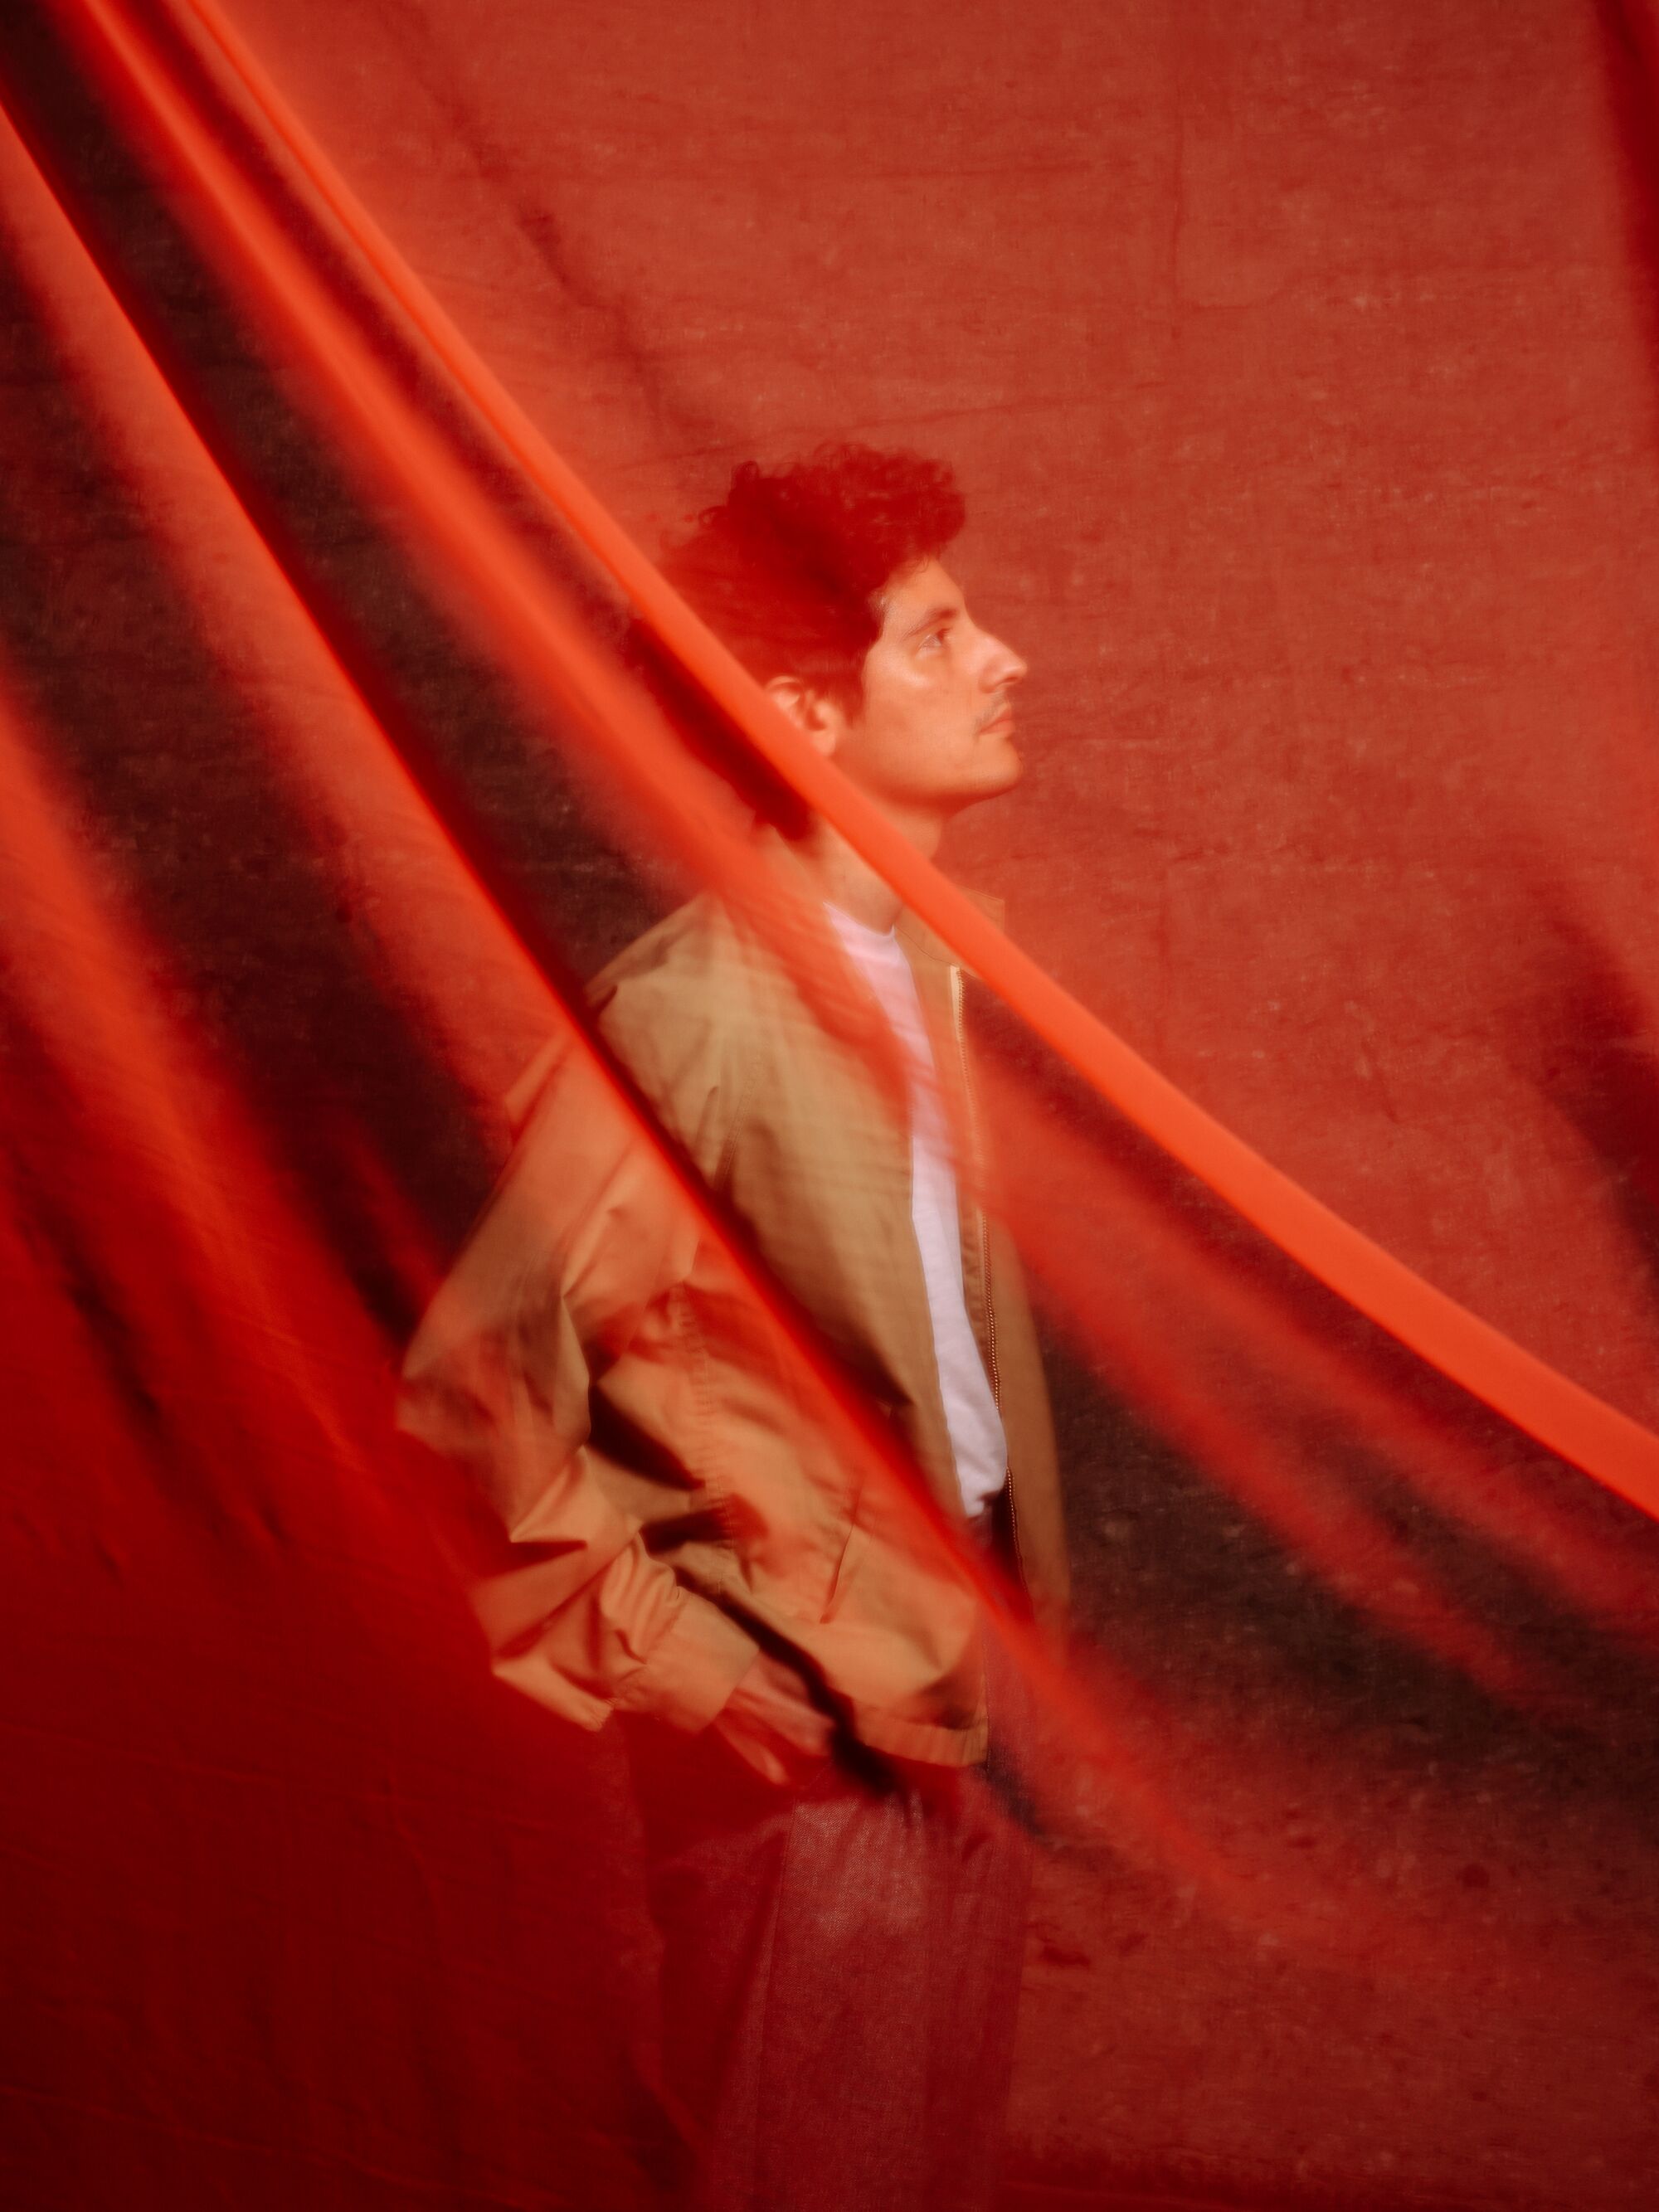 A man stands amid red sheer drapery.